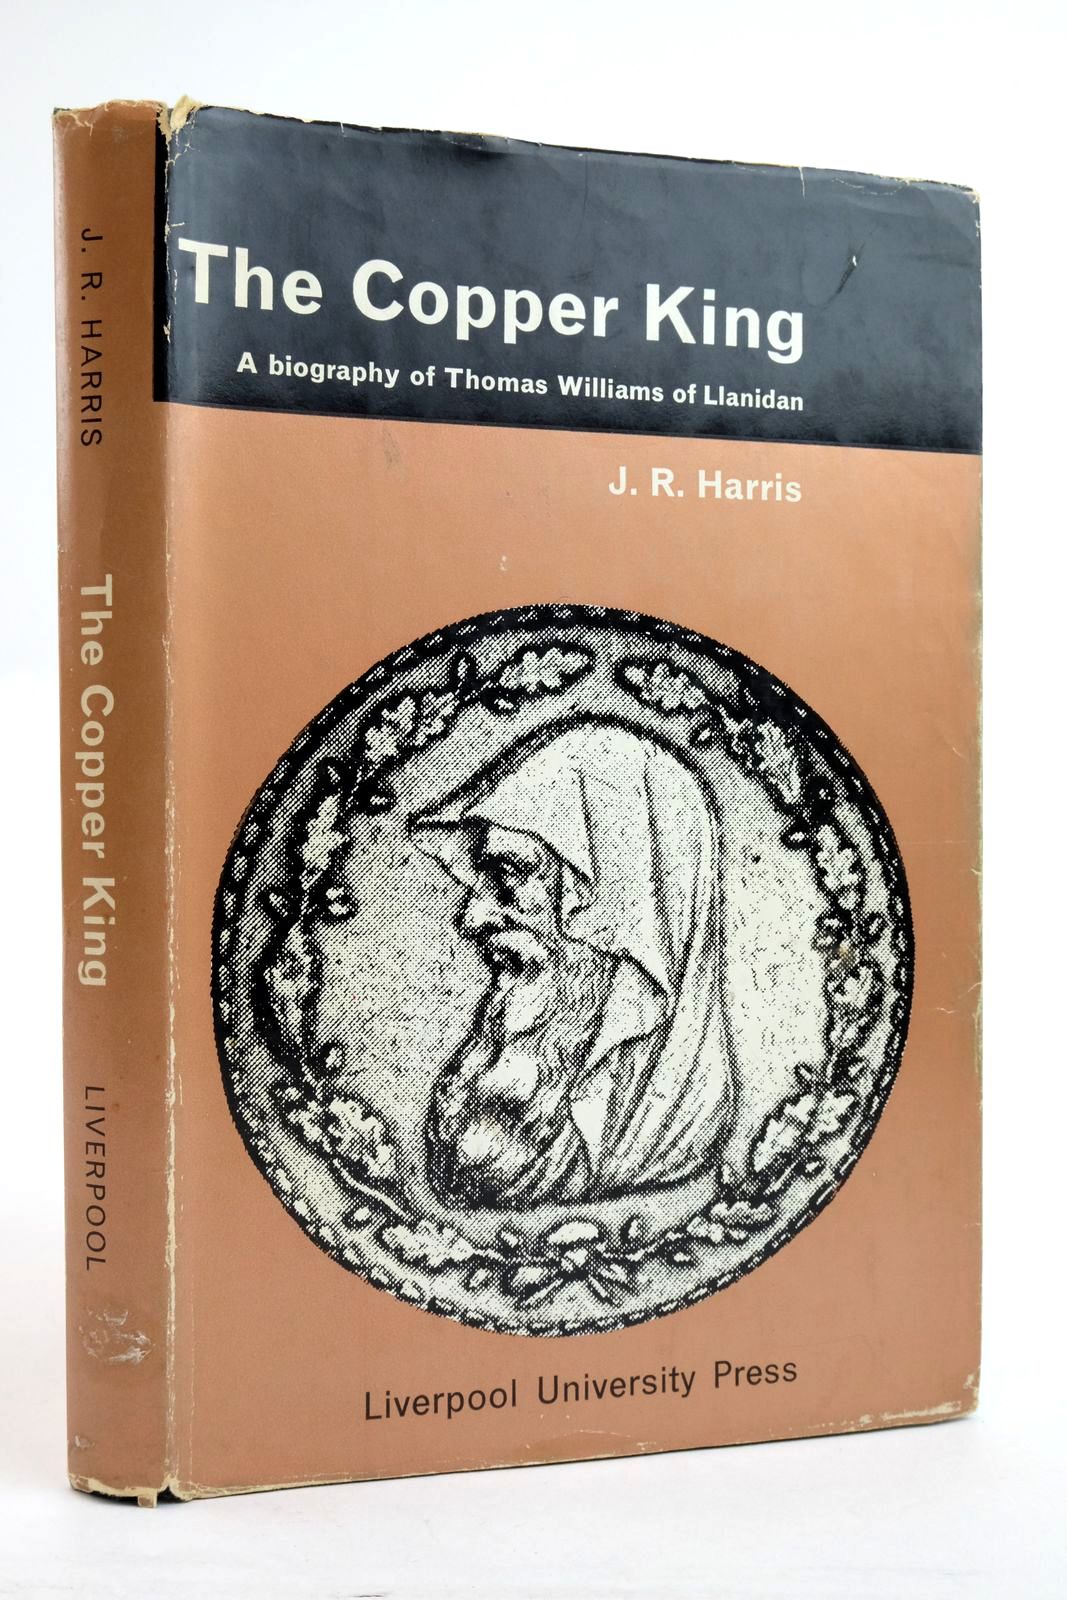 Photo of THE COPPER KING: A BIOGRAPHY OF THOMAS WILLIAMS OF LLANIDAN written by Harris, J.R. published by Liverpool University Press (STOCK CODE: 2136080)  for sale by Stella & Rose's Books